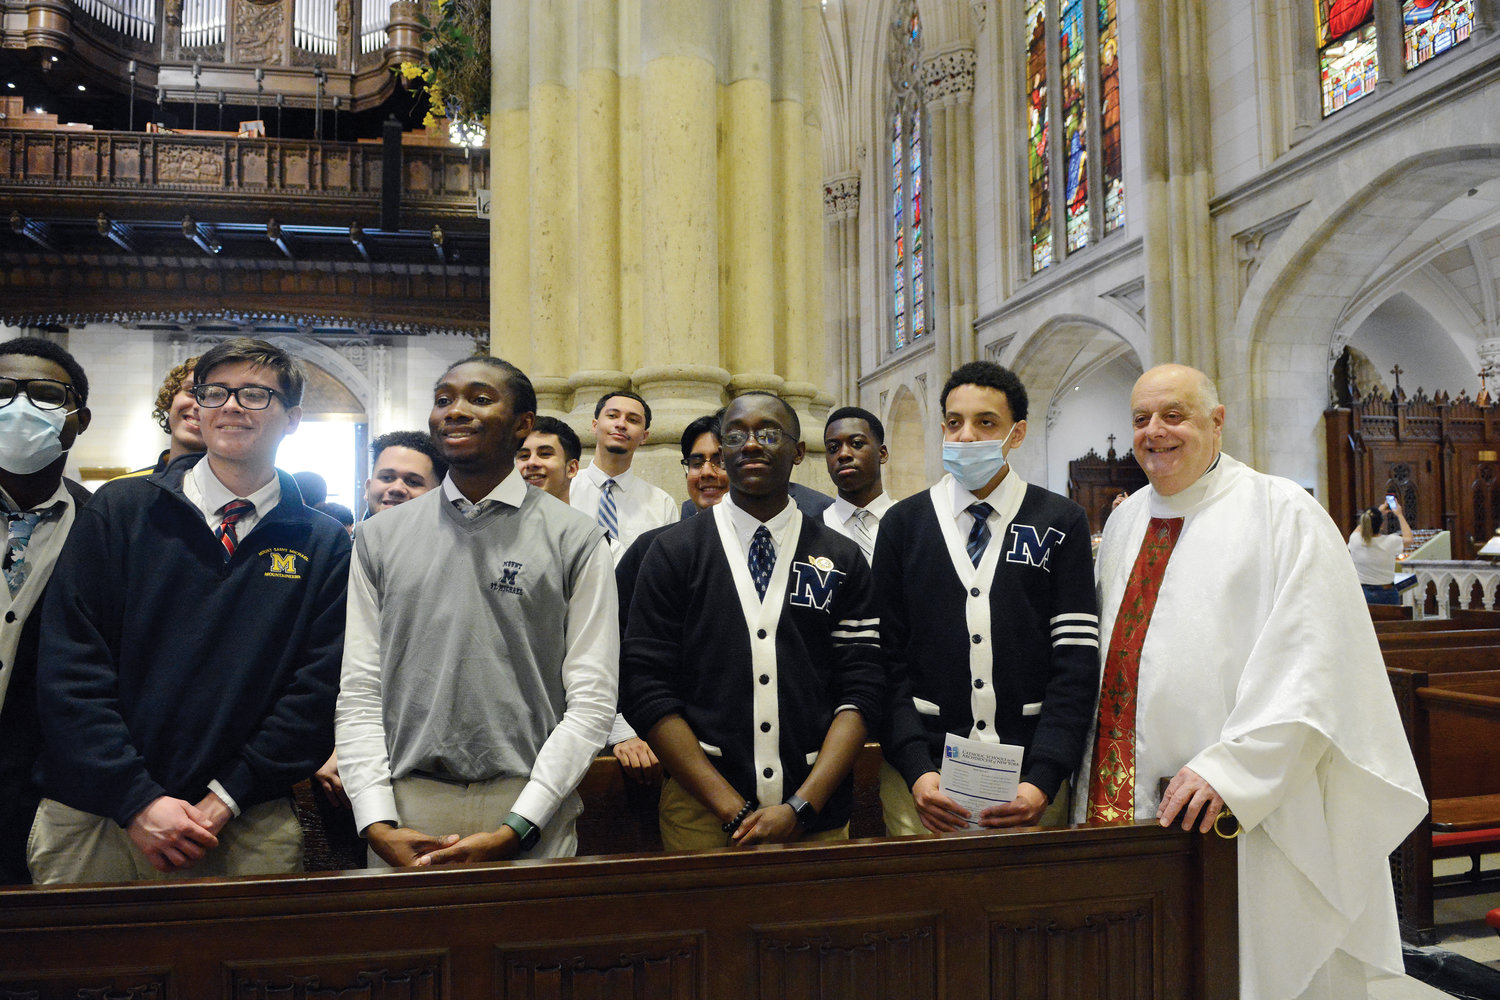 Msgr. Joseph LaMorte, vicar general for the archdiocese and a graduate of Mount St. Michael Academy in the Bronx, poses with students from that school at a May 16 Mass Cardinal Dolan celebrated at St. Patrick’s Cathedral for graduating seniors at Catholic high schools in the archdiocese.